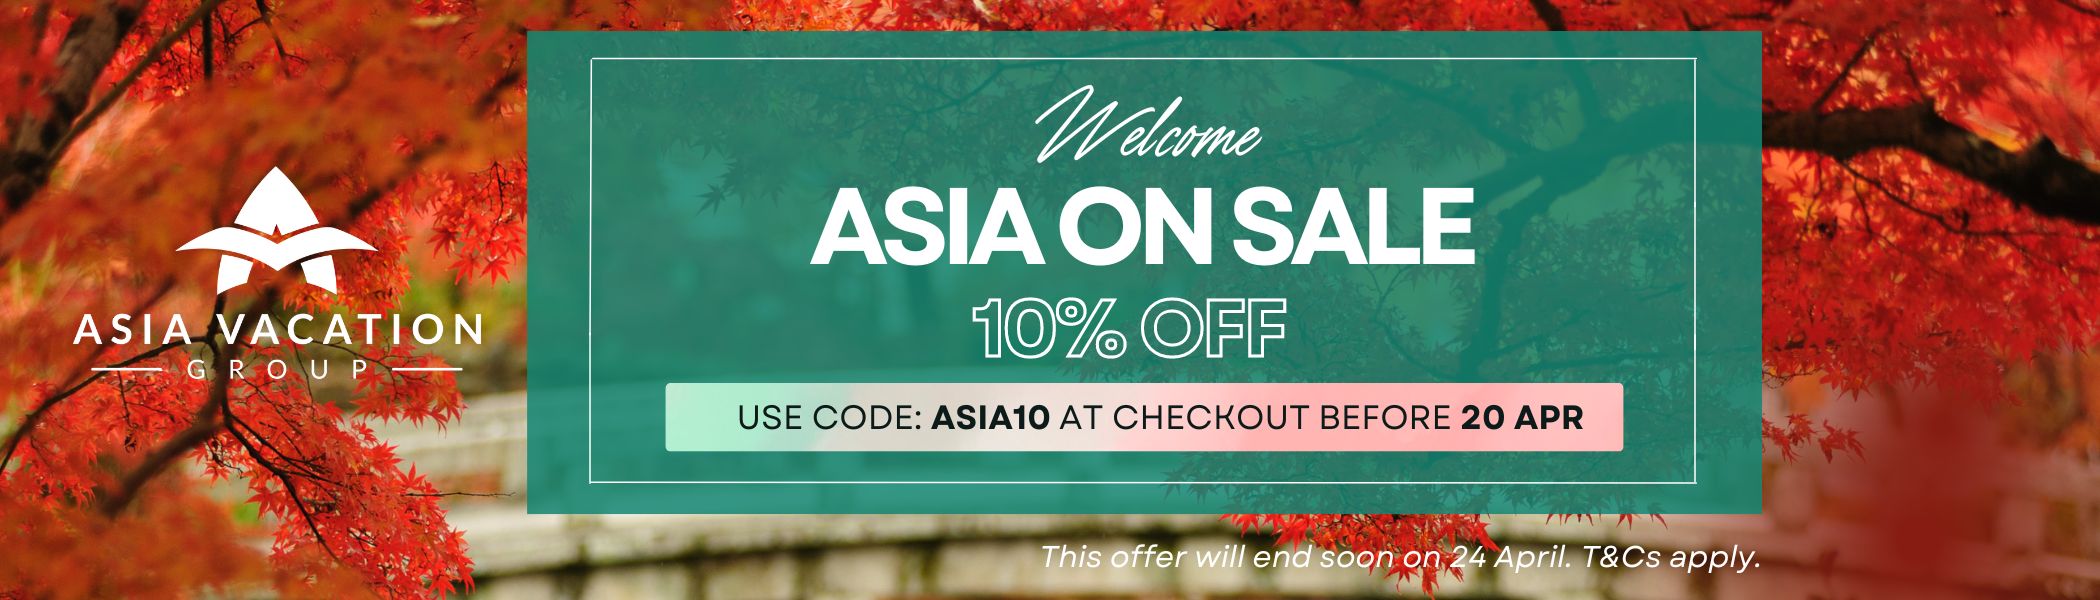 Asia Vacation Group deals